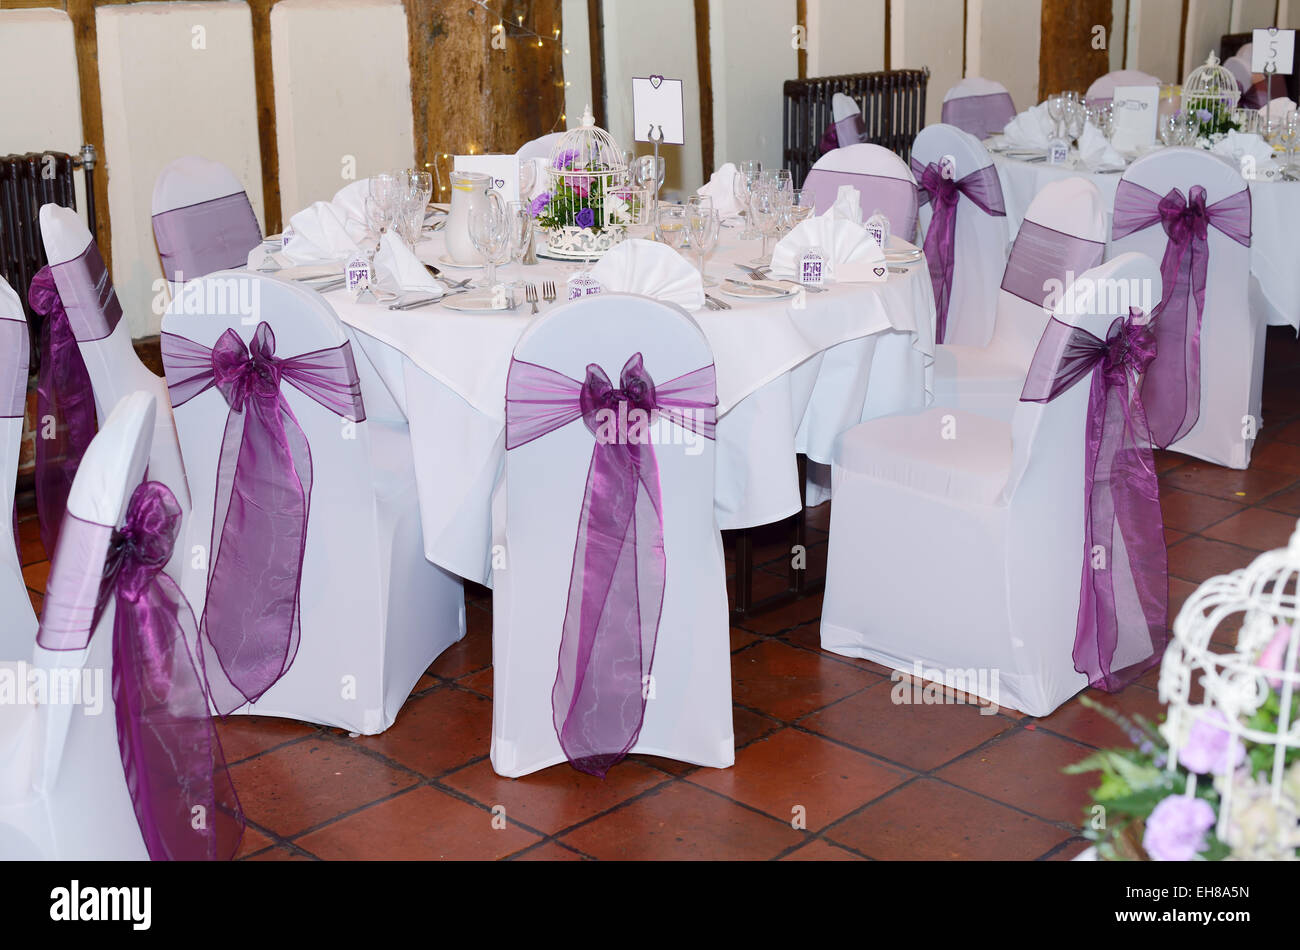 Wedding reception showing chair and table covers in white and purple Stock Photo